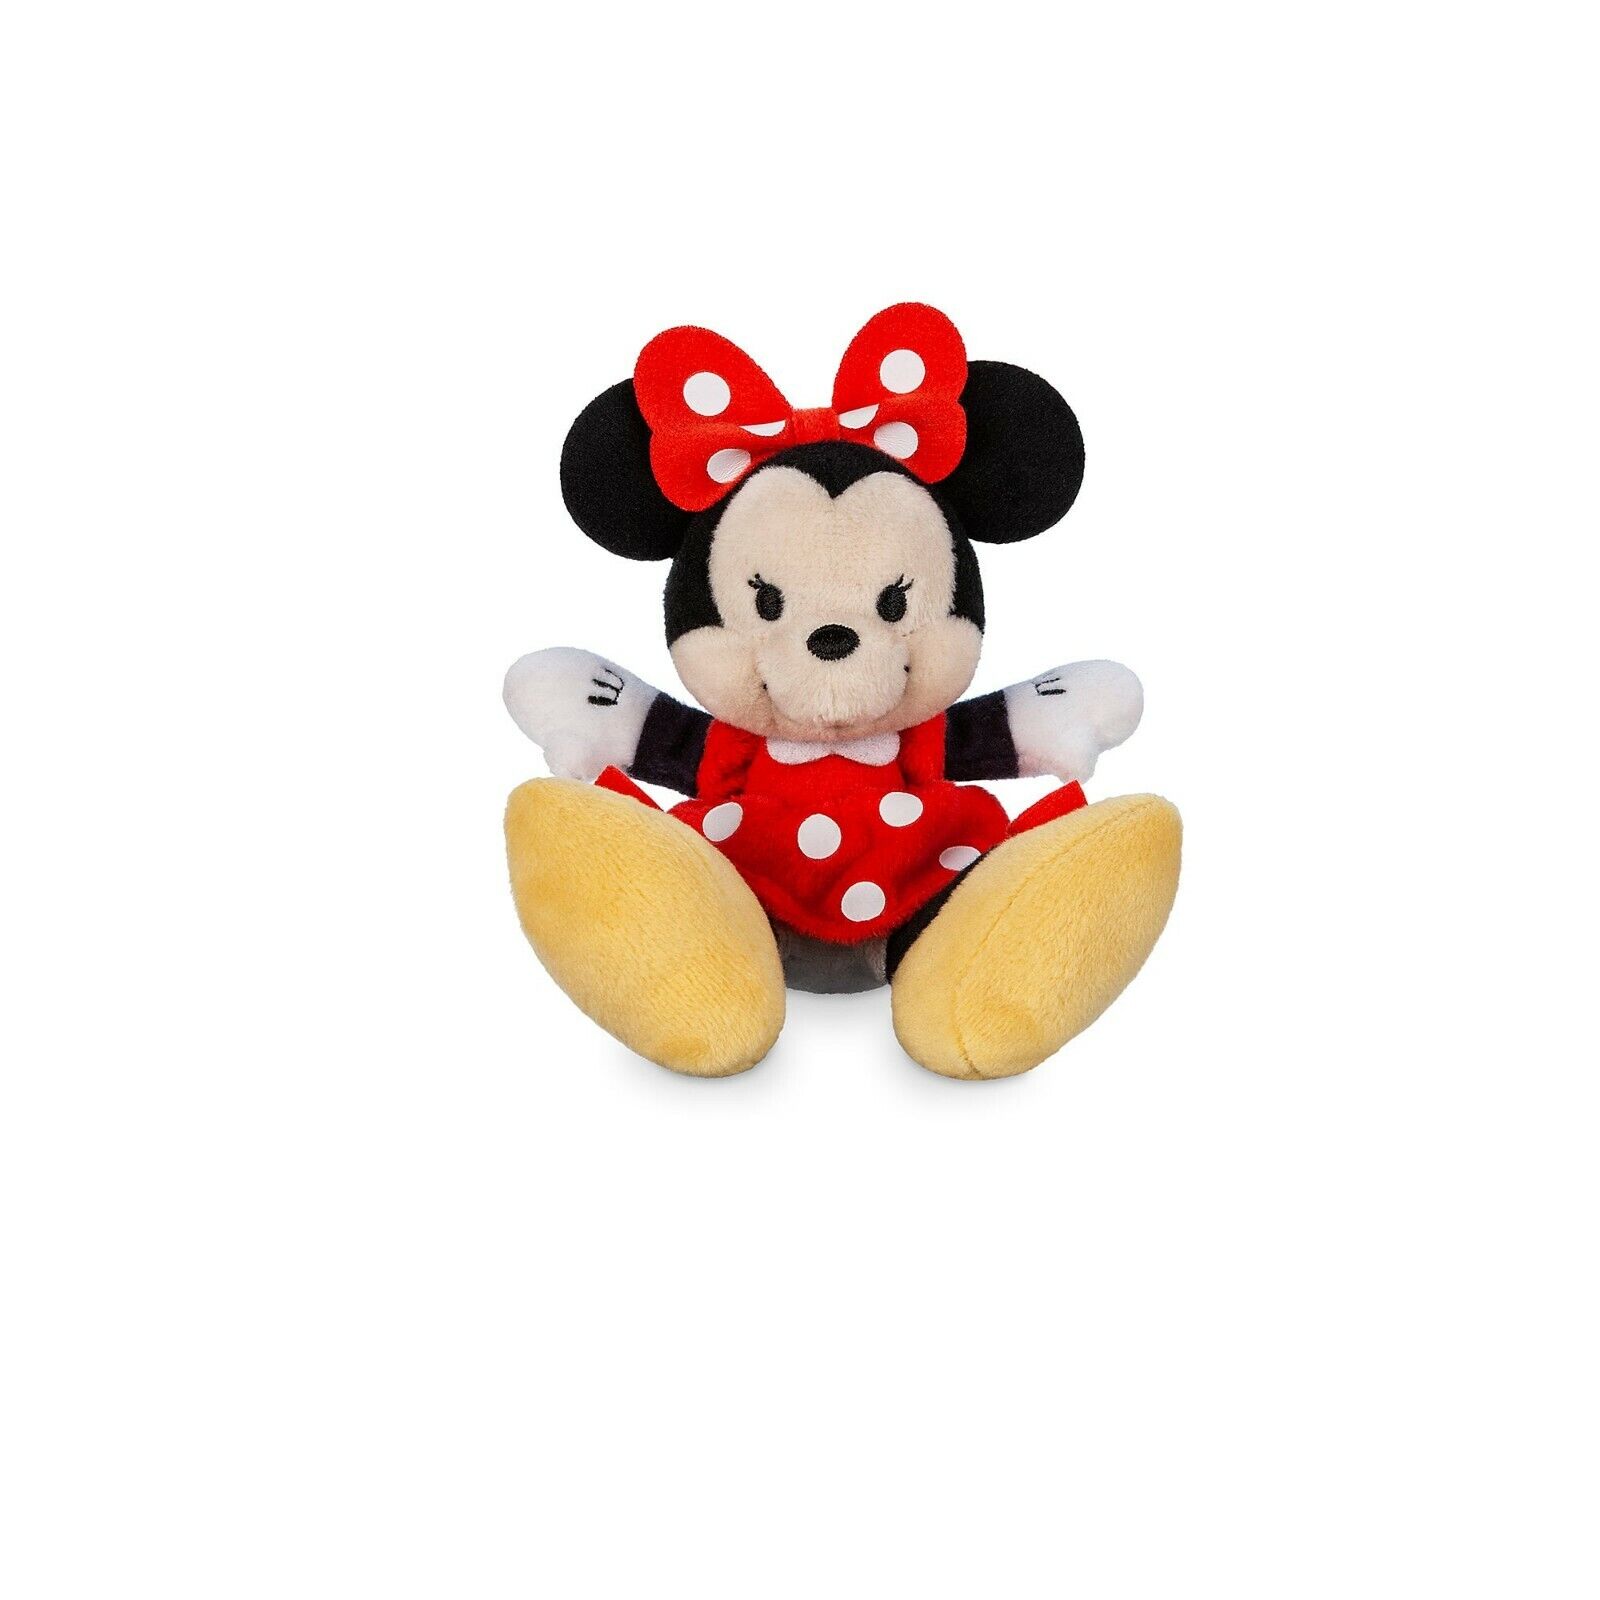 Disney Store Authentic Minnie Mouse Tiny Big Feet Small Plush Toy Doll NWT